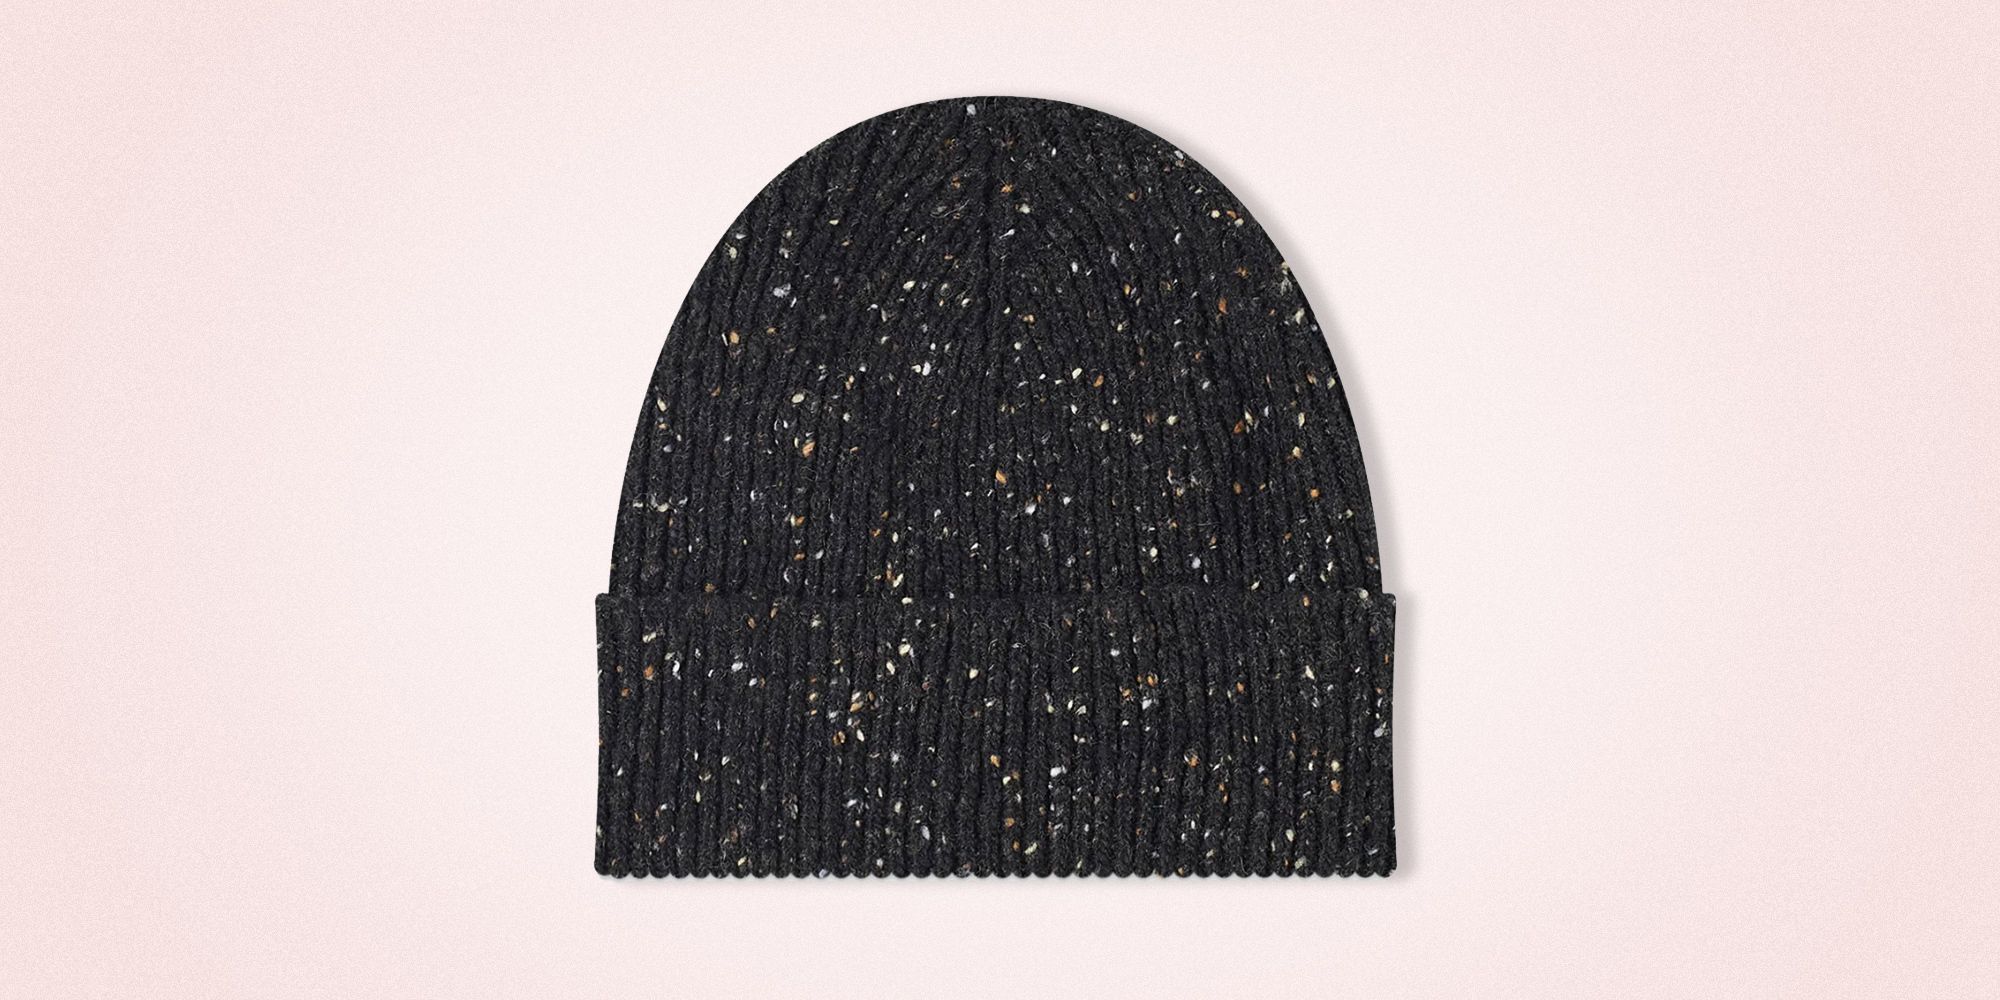 beanies that cover your face